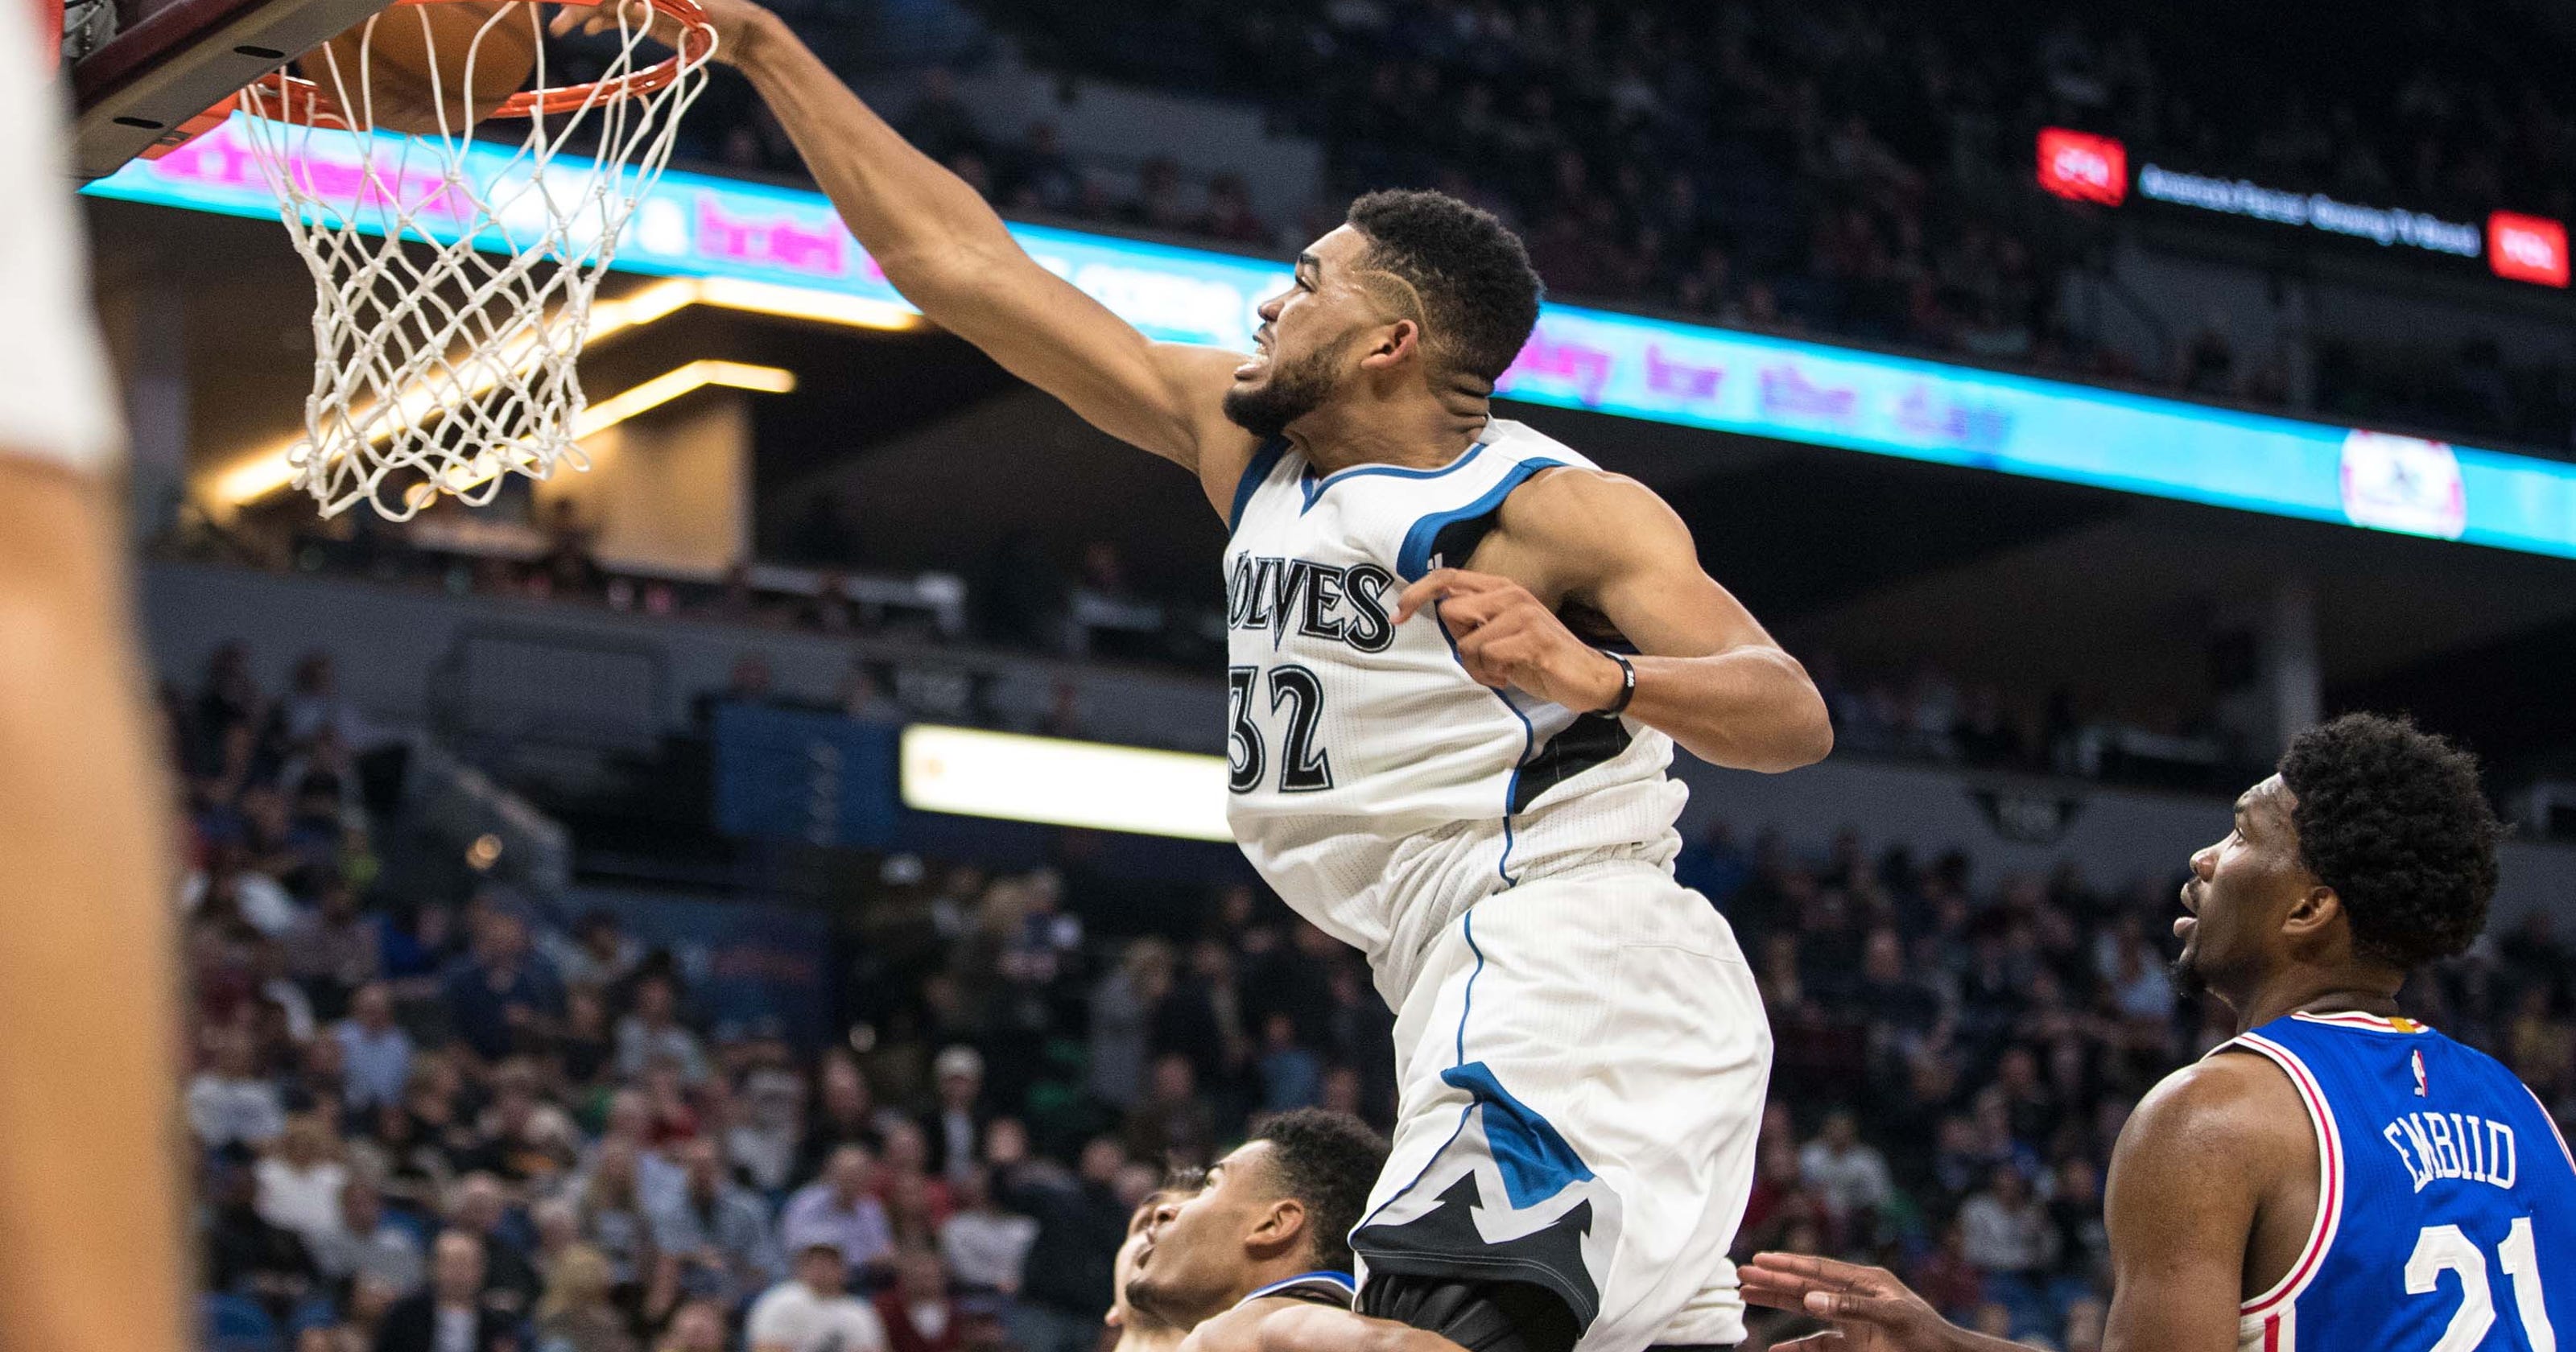 Karl-Anthony Towns throws down poster dunk